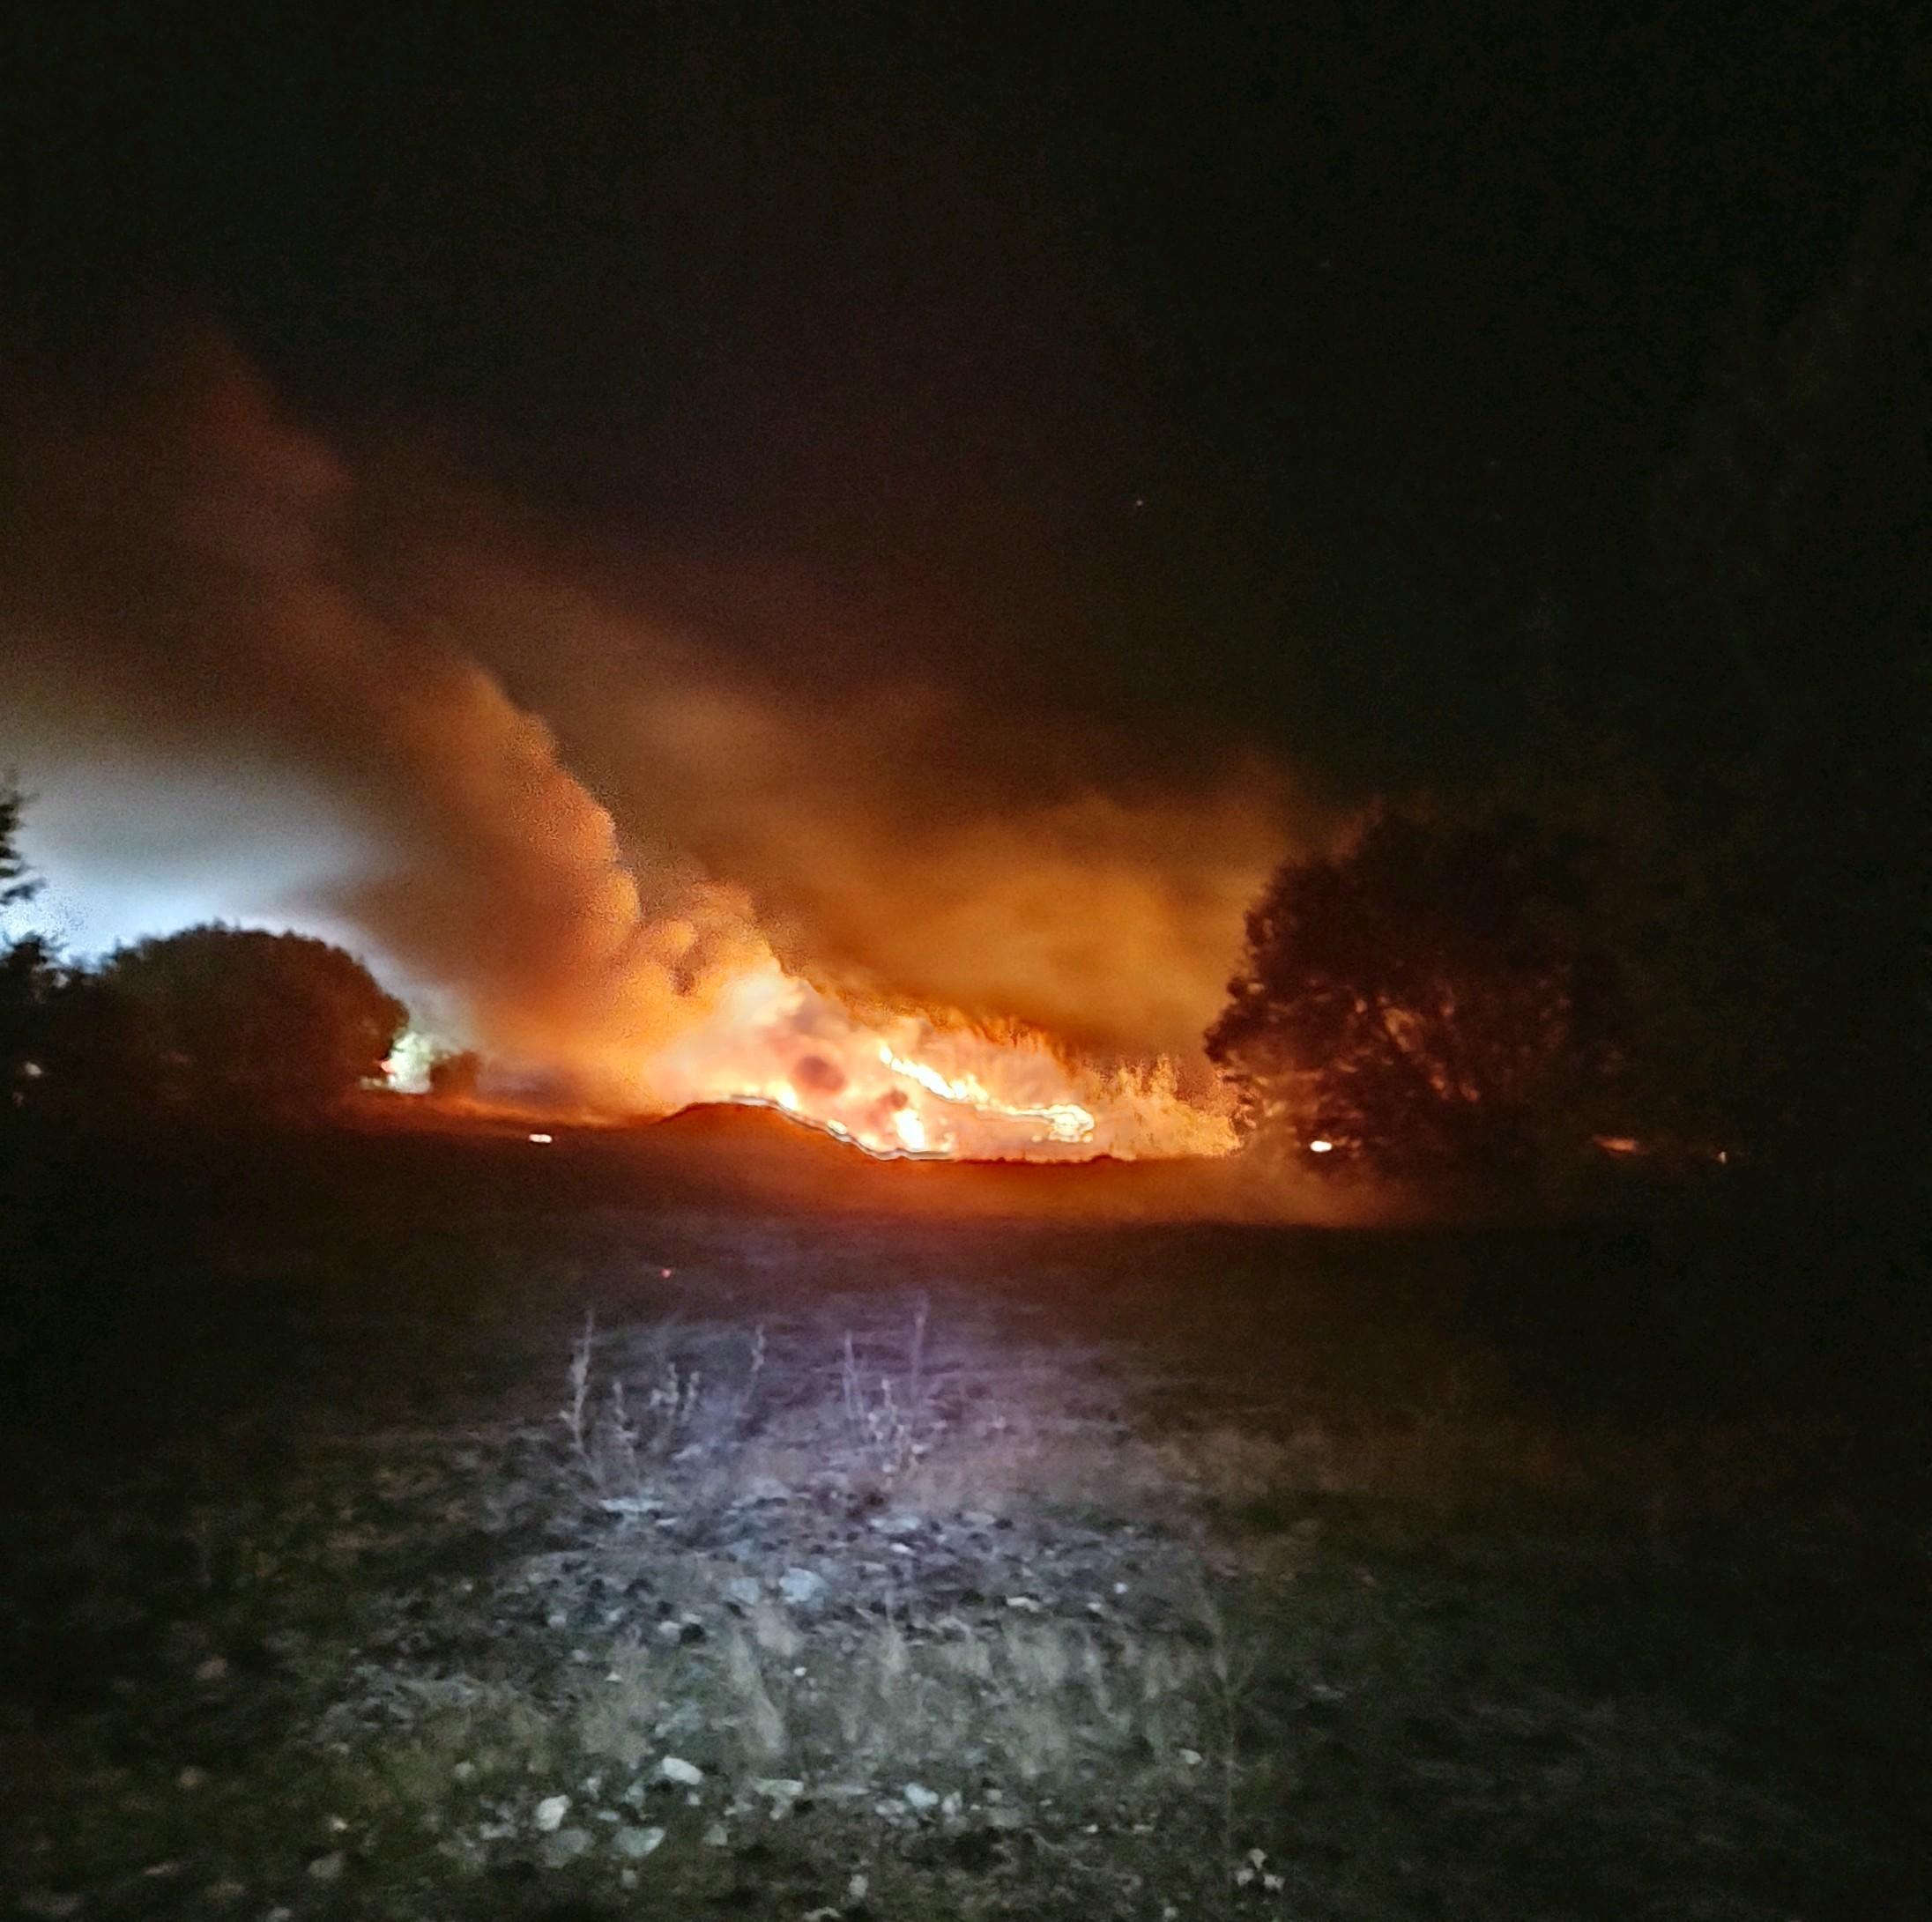 Nighttime flareup on northern perimeter of fire. Photo Credit: Chris Owens